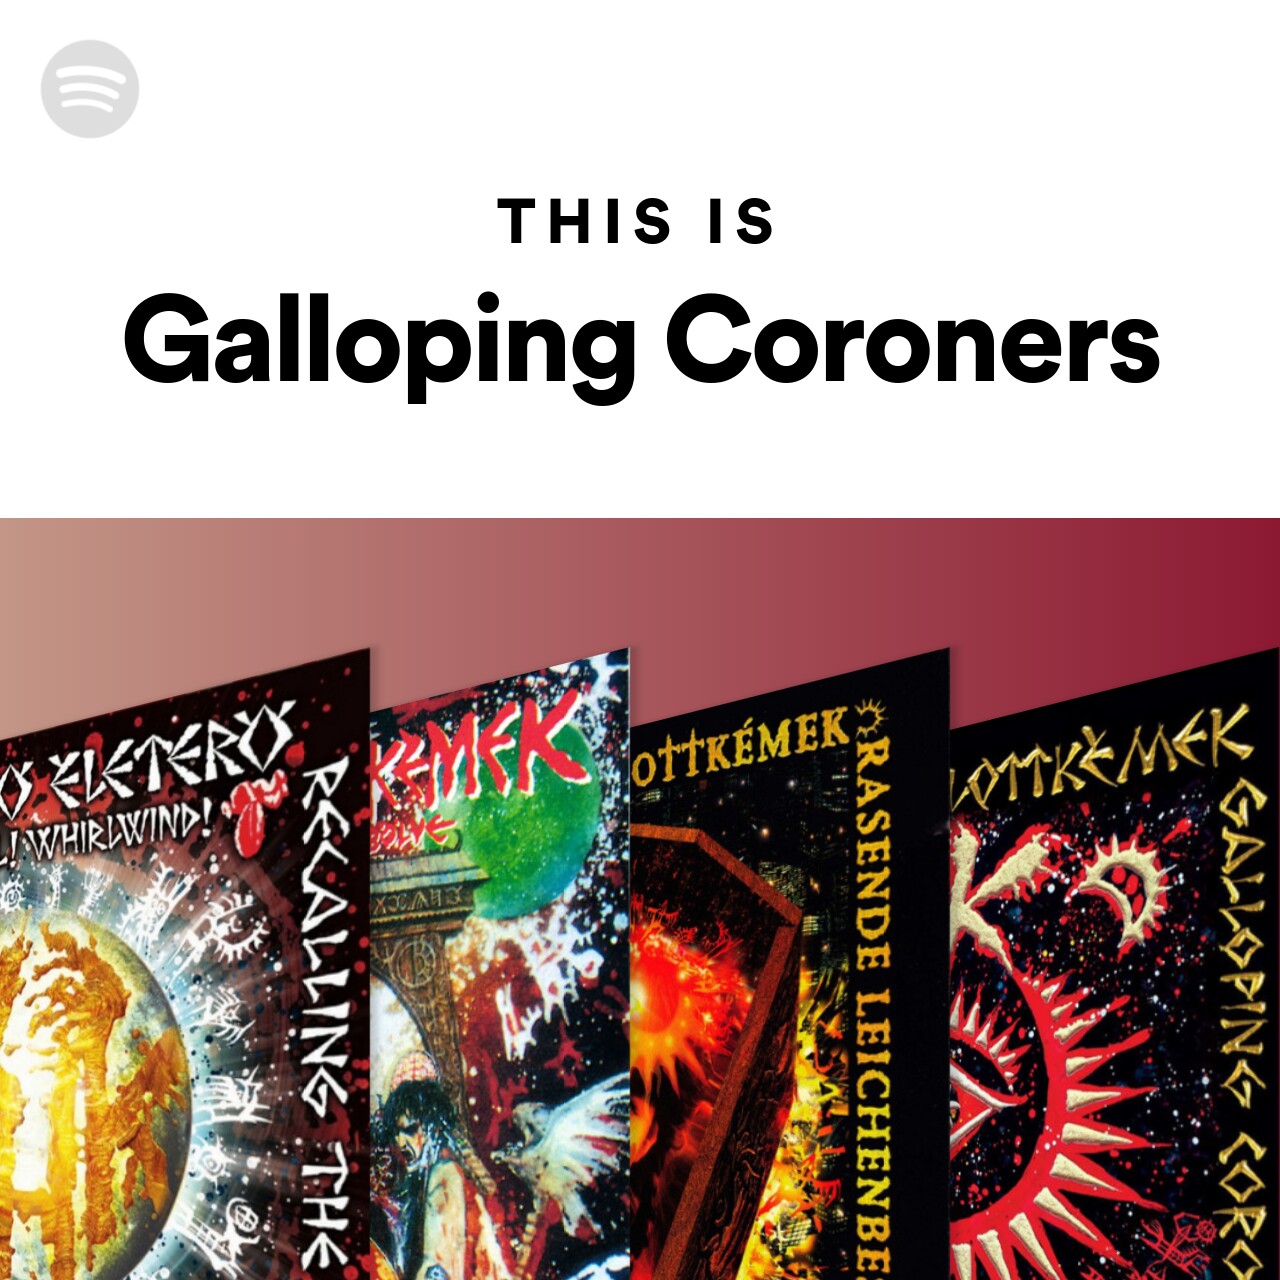 This Is Galloping Coroners